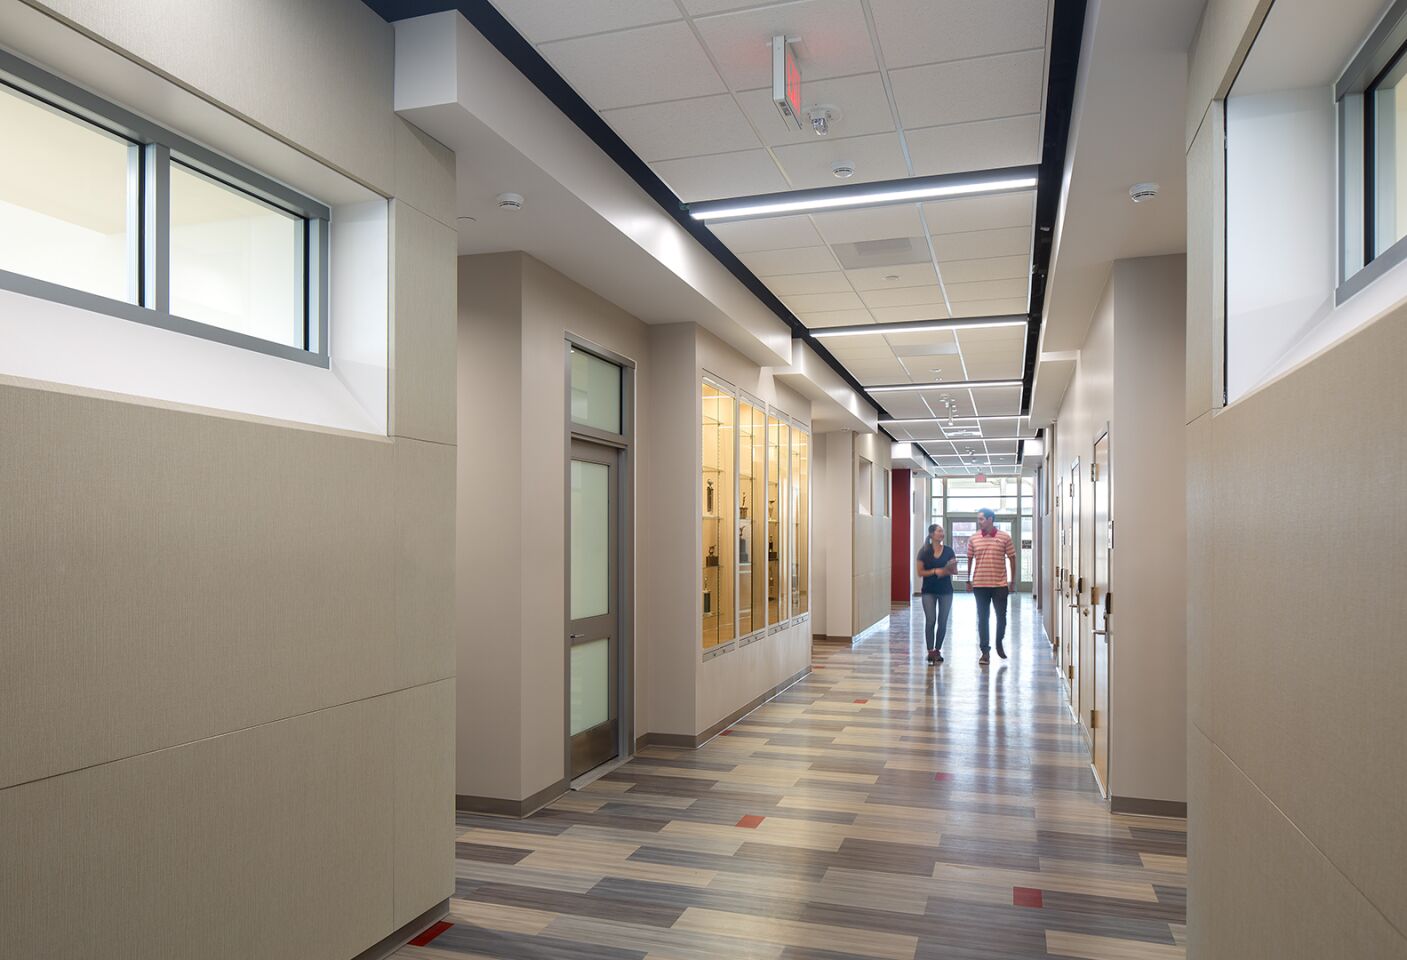 A peek inside Point Loma High School's new three-story, 38,000-square-foot building.